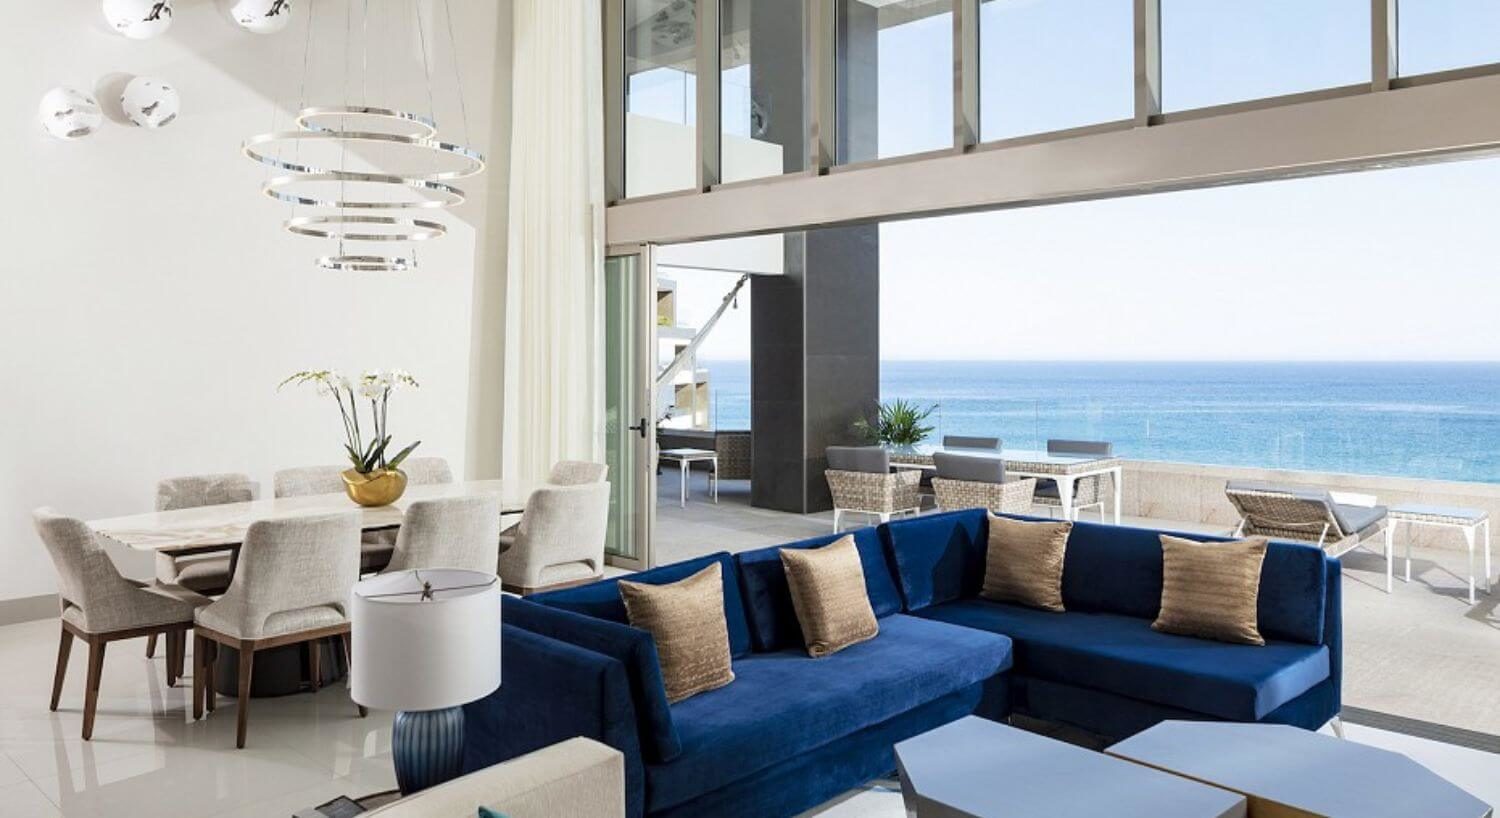 A large living room and dining area with 2 story ceilings and open sliding doors that span the width of the room and open out to a large balcony with outdoor patio furniture and sweeping ocean views.